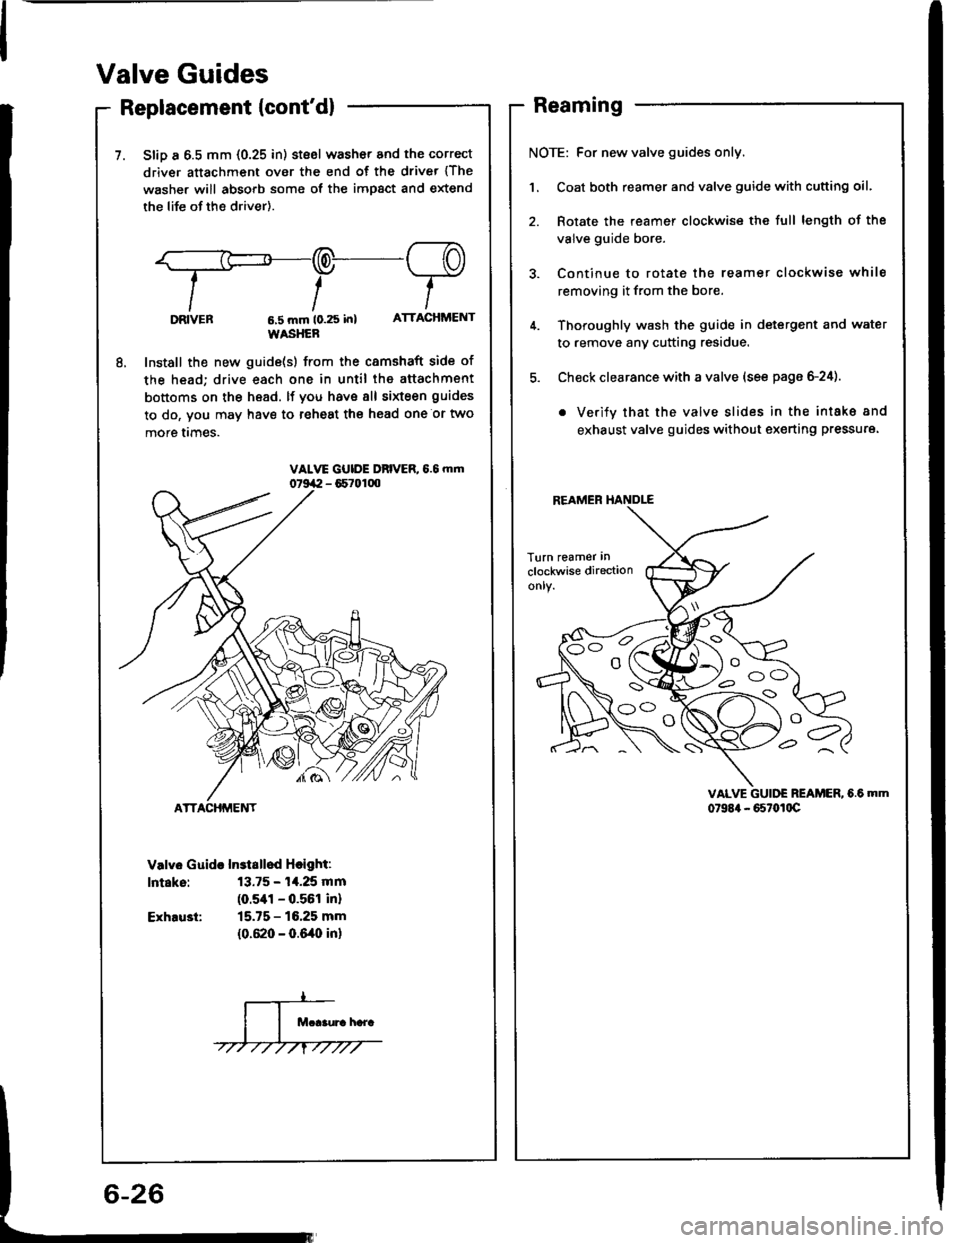 HONDA INTEGRA 1994 4.G Workshop Manual Valve Guides
Replacement {contd}
7. SliD a 6.5 mm {0.25 in) stsel washor and the correct
driver attachment over the end of the driver {The
washer will absorb some of the impact and extend
the life of